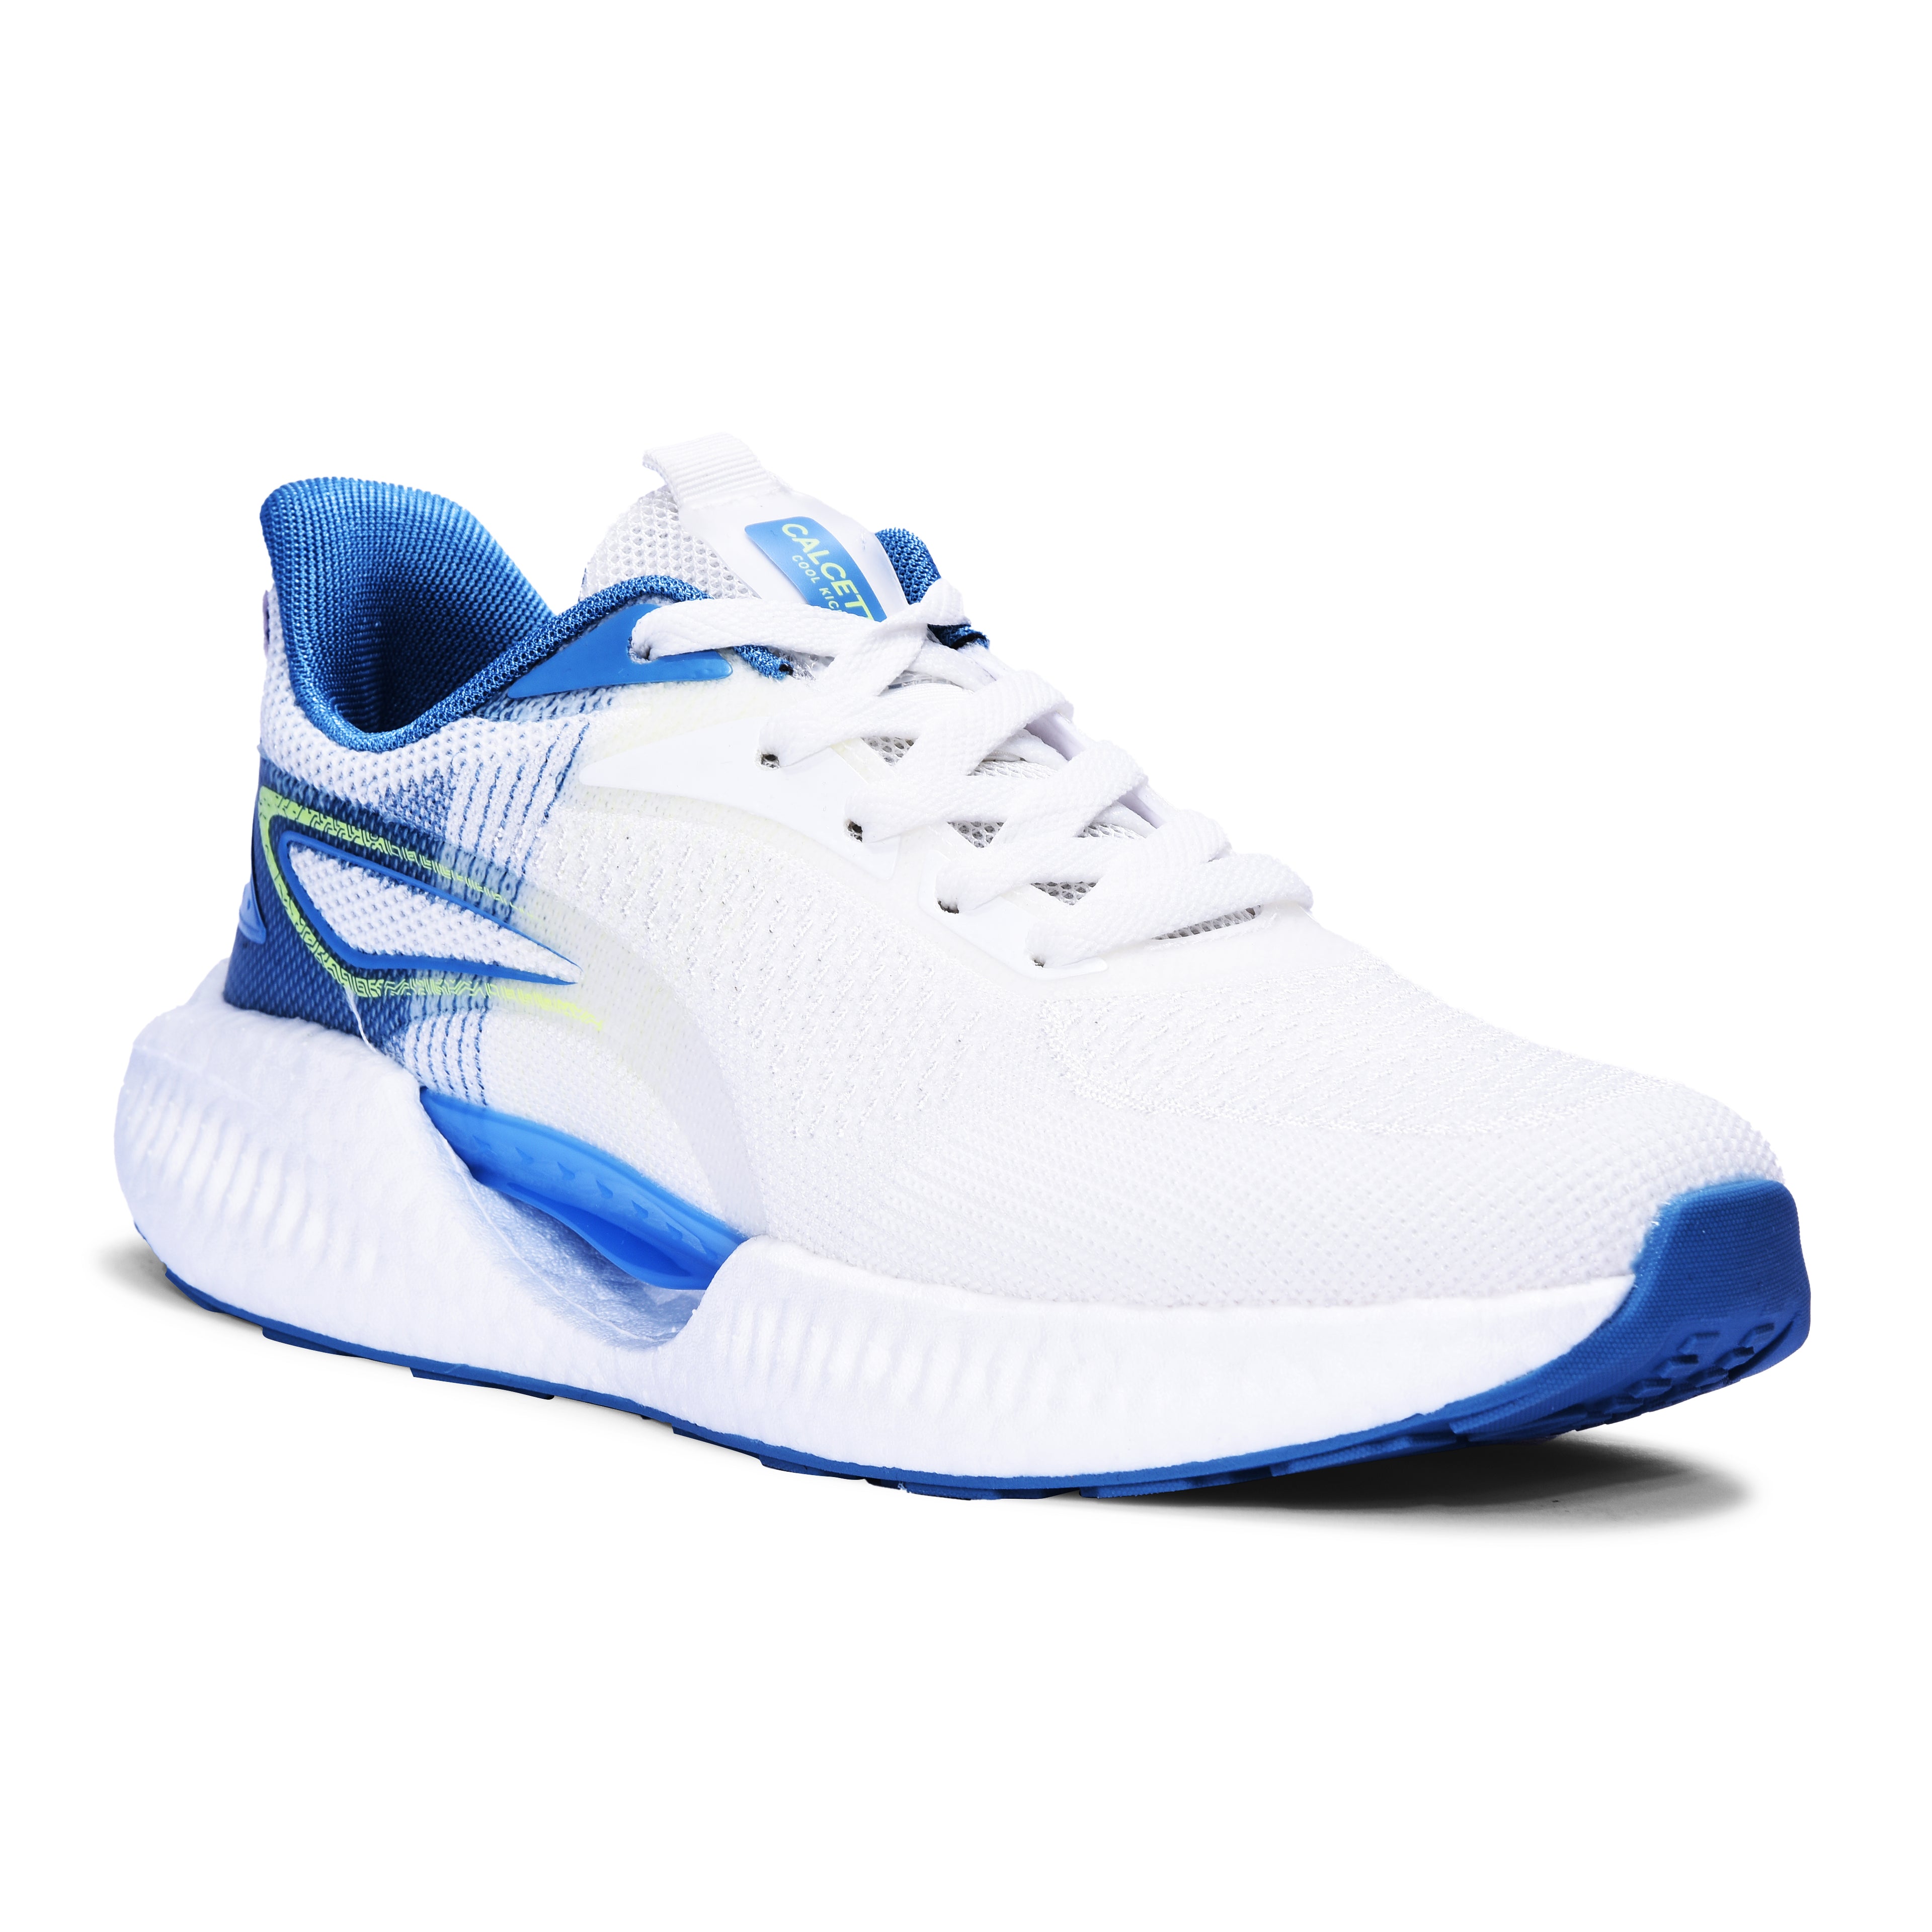 Calcetto CLT-1007 White Blue Running Shoe For Men